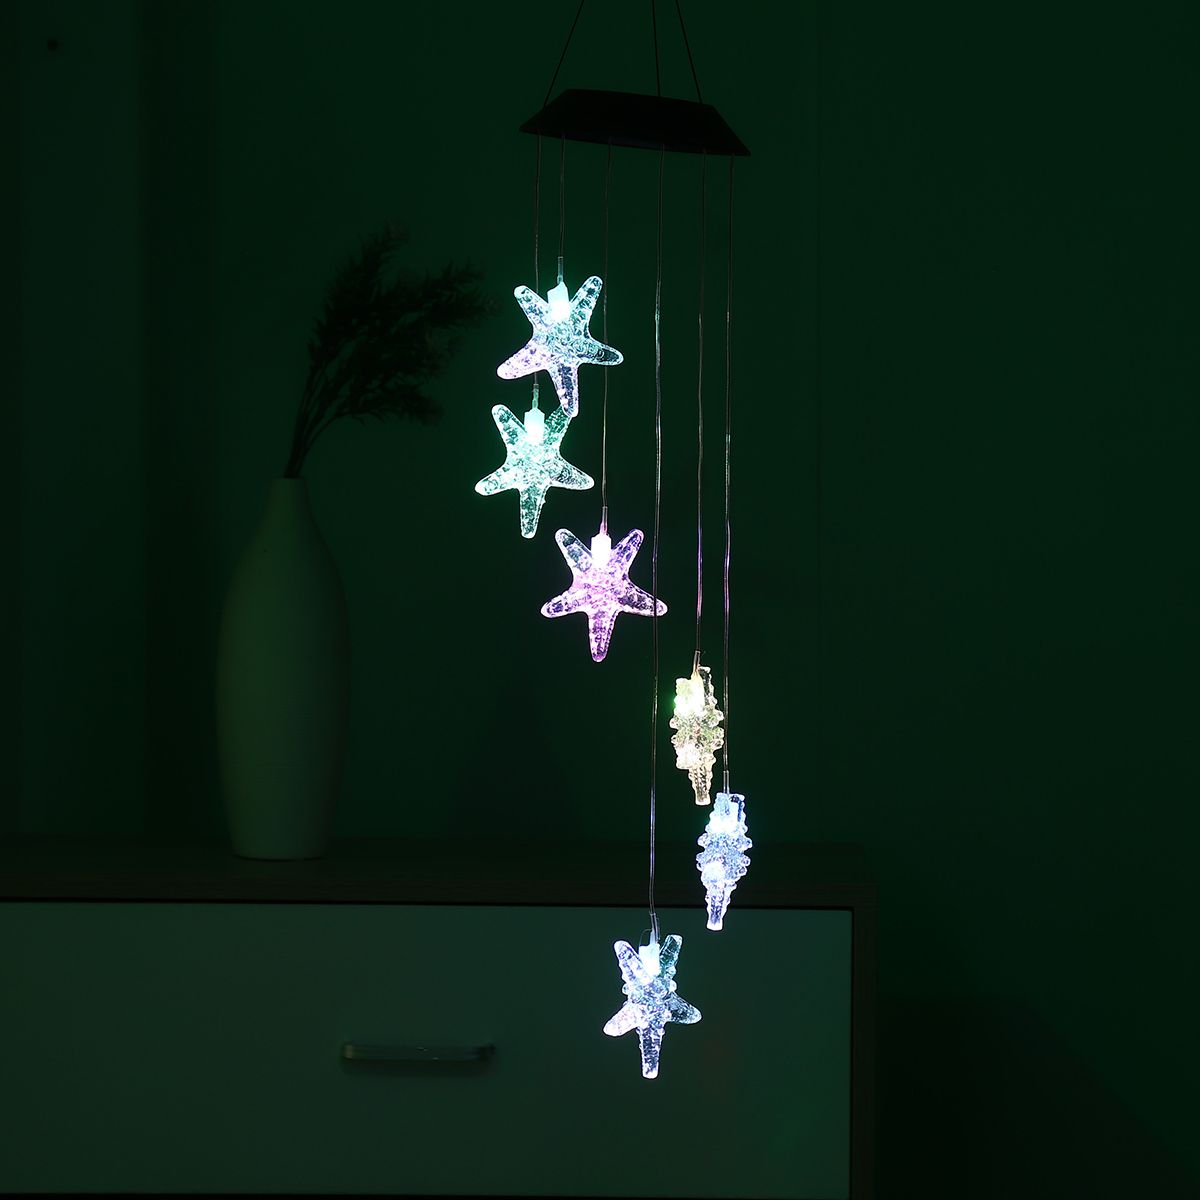 Outdoor-LED-Solar-Powered-Wind-Chime-Light-Color-Changing-Waterproof-Yard-Garden-Lamp-Decor-1692352